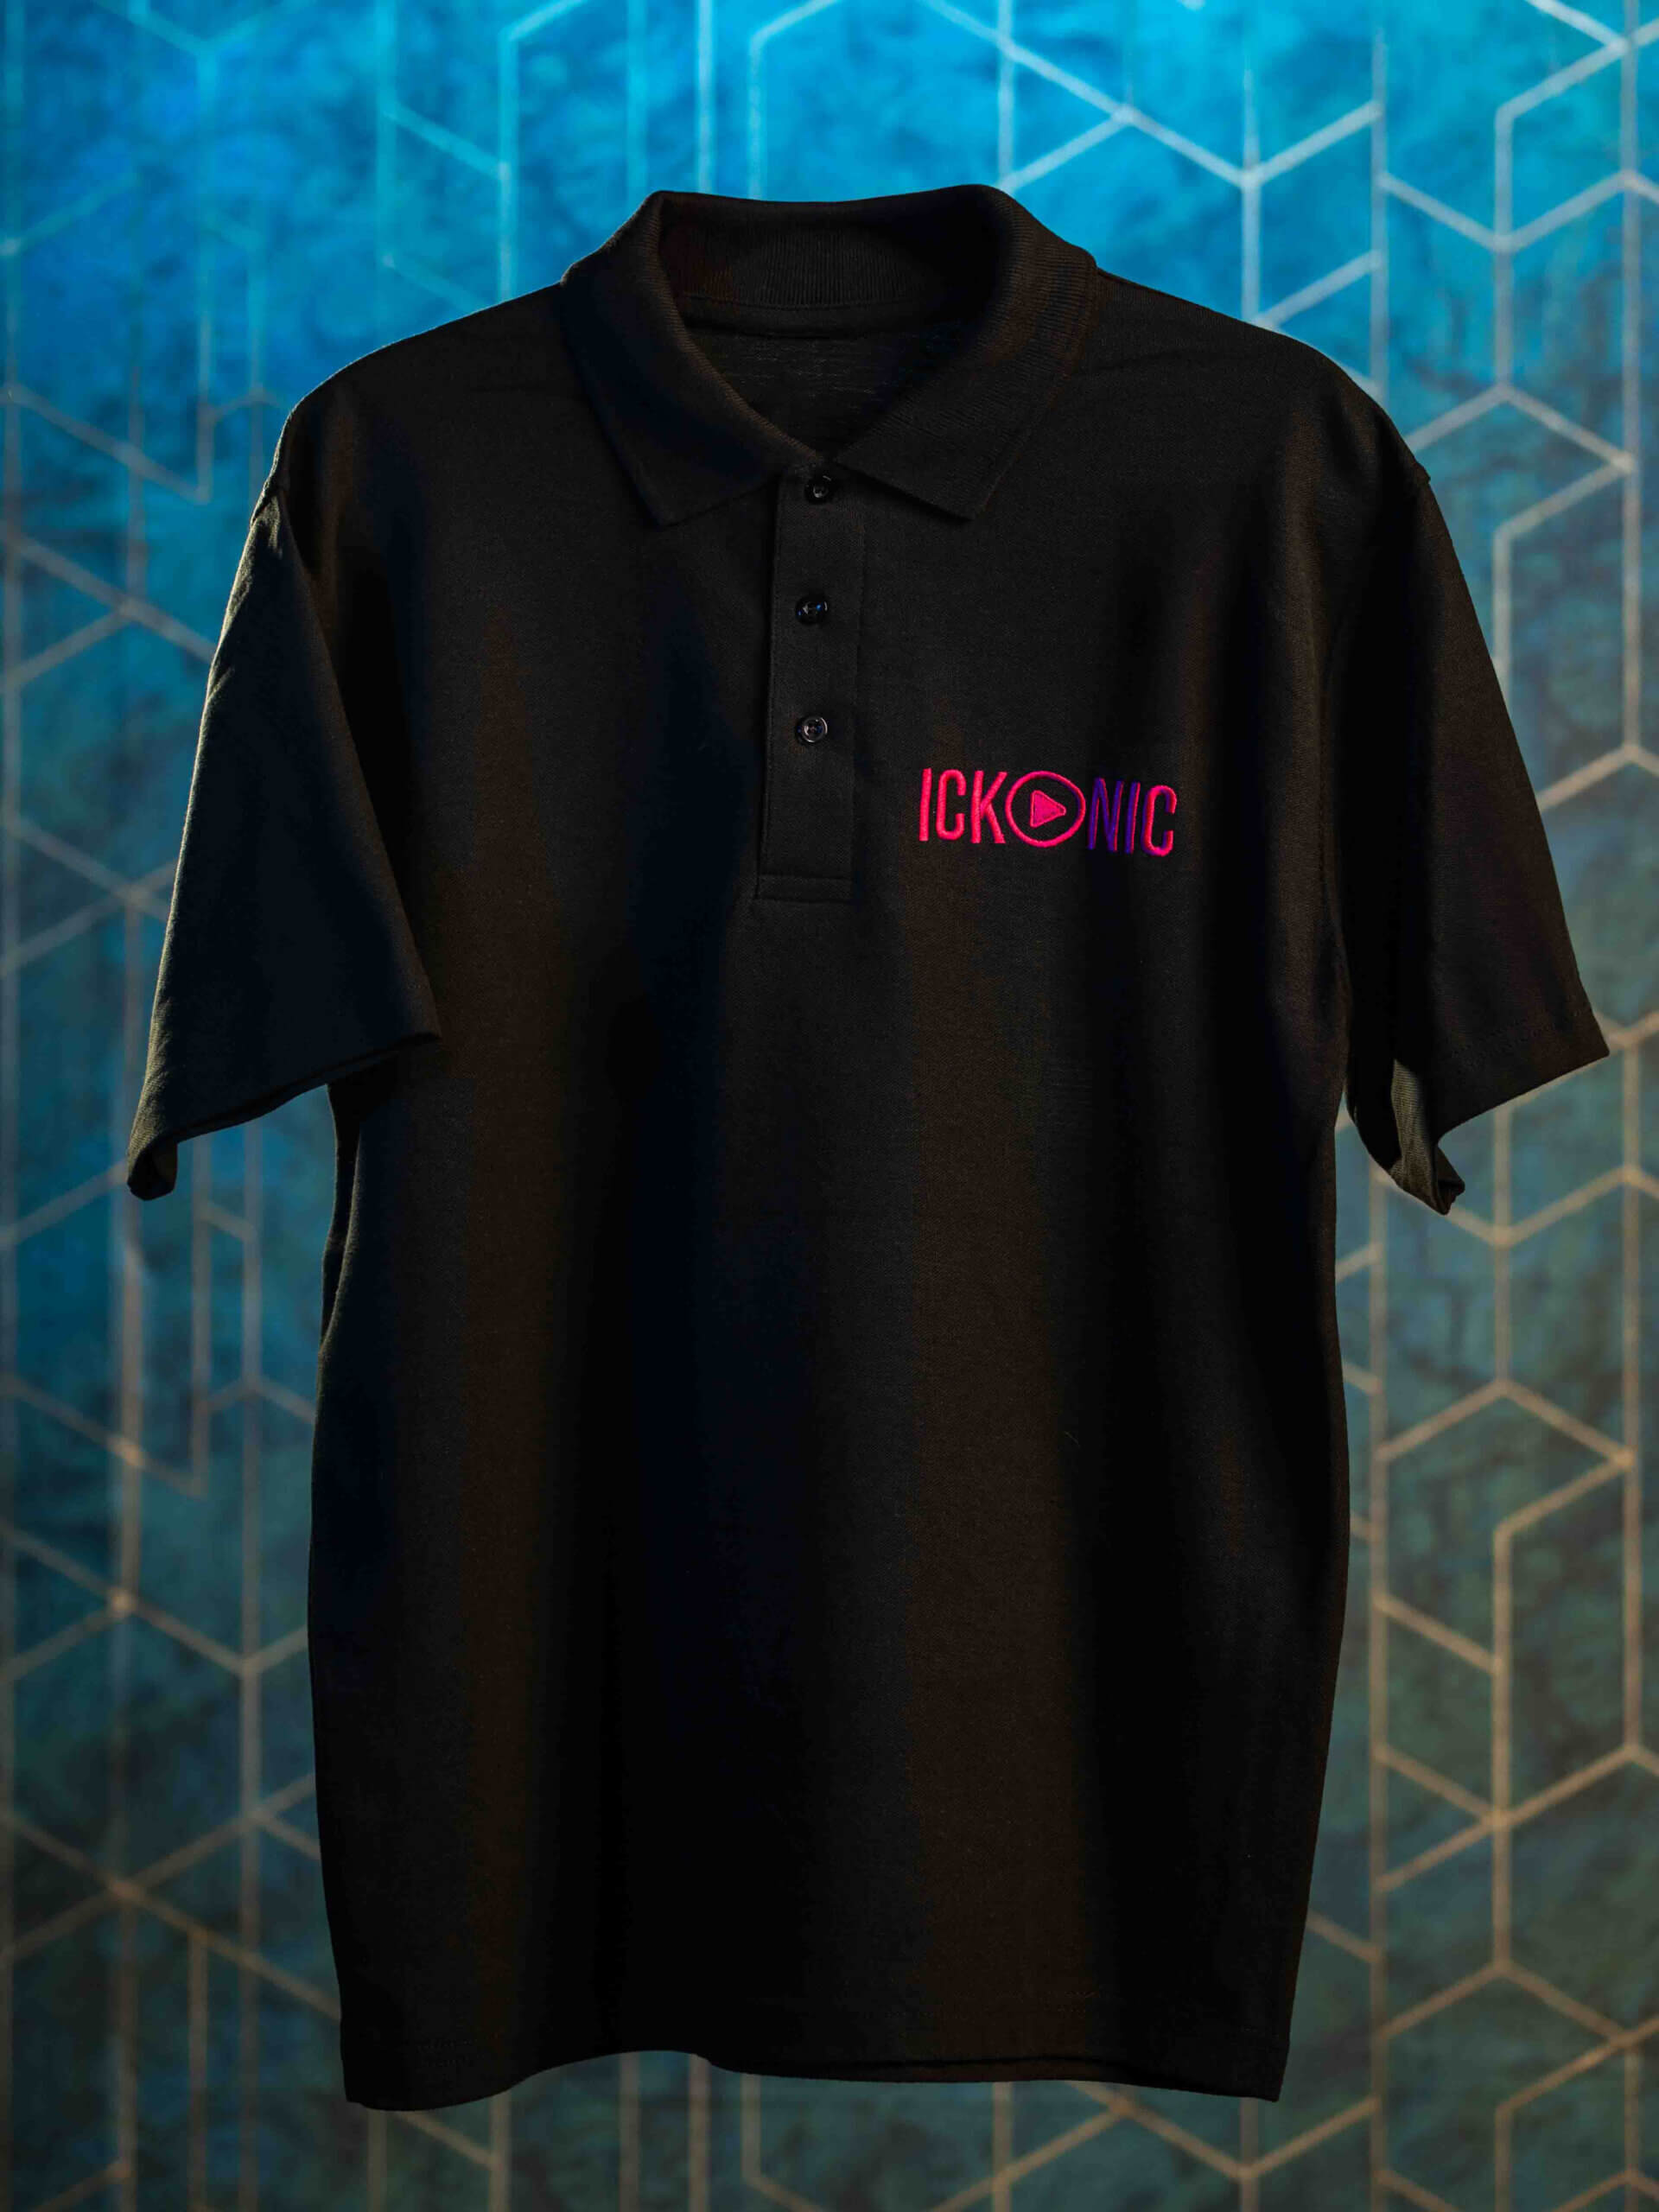 Ickonic Polo Pink